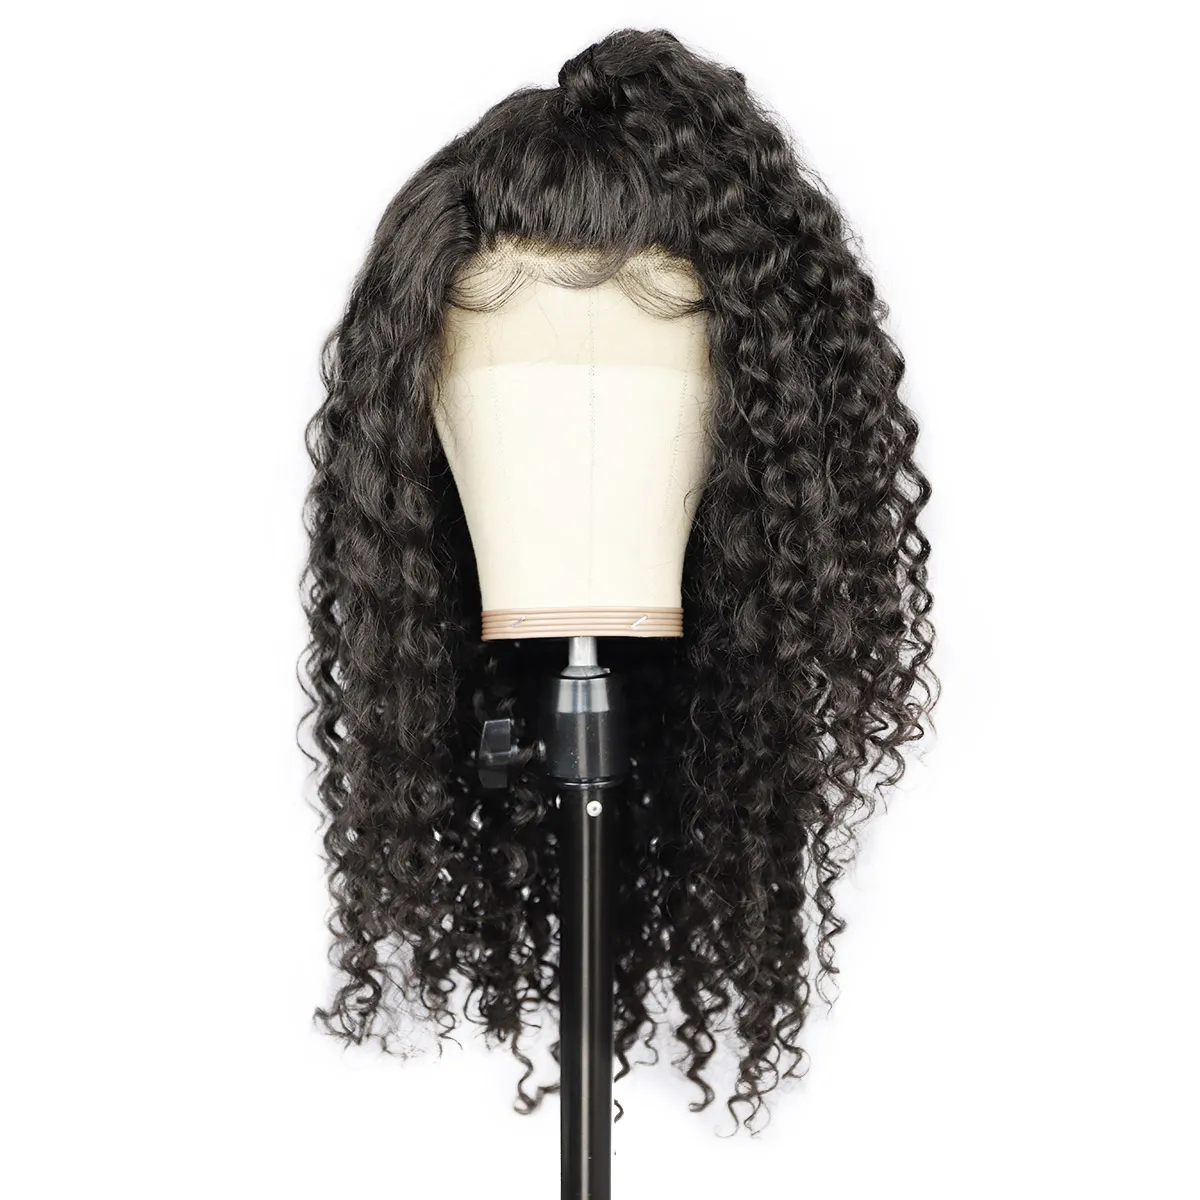 Ishow Human Hair Lace Front Wigs Brazilian Deep Wave 13 4 Medium Size Wig266a